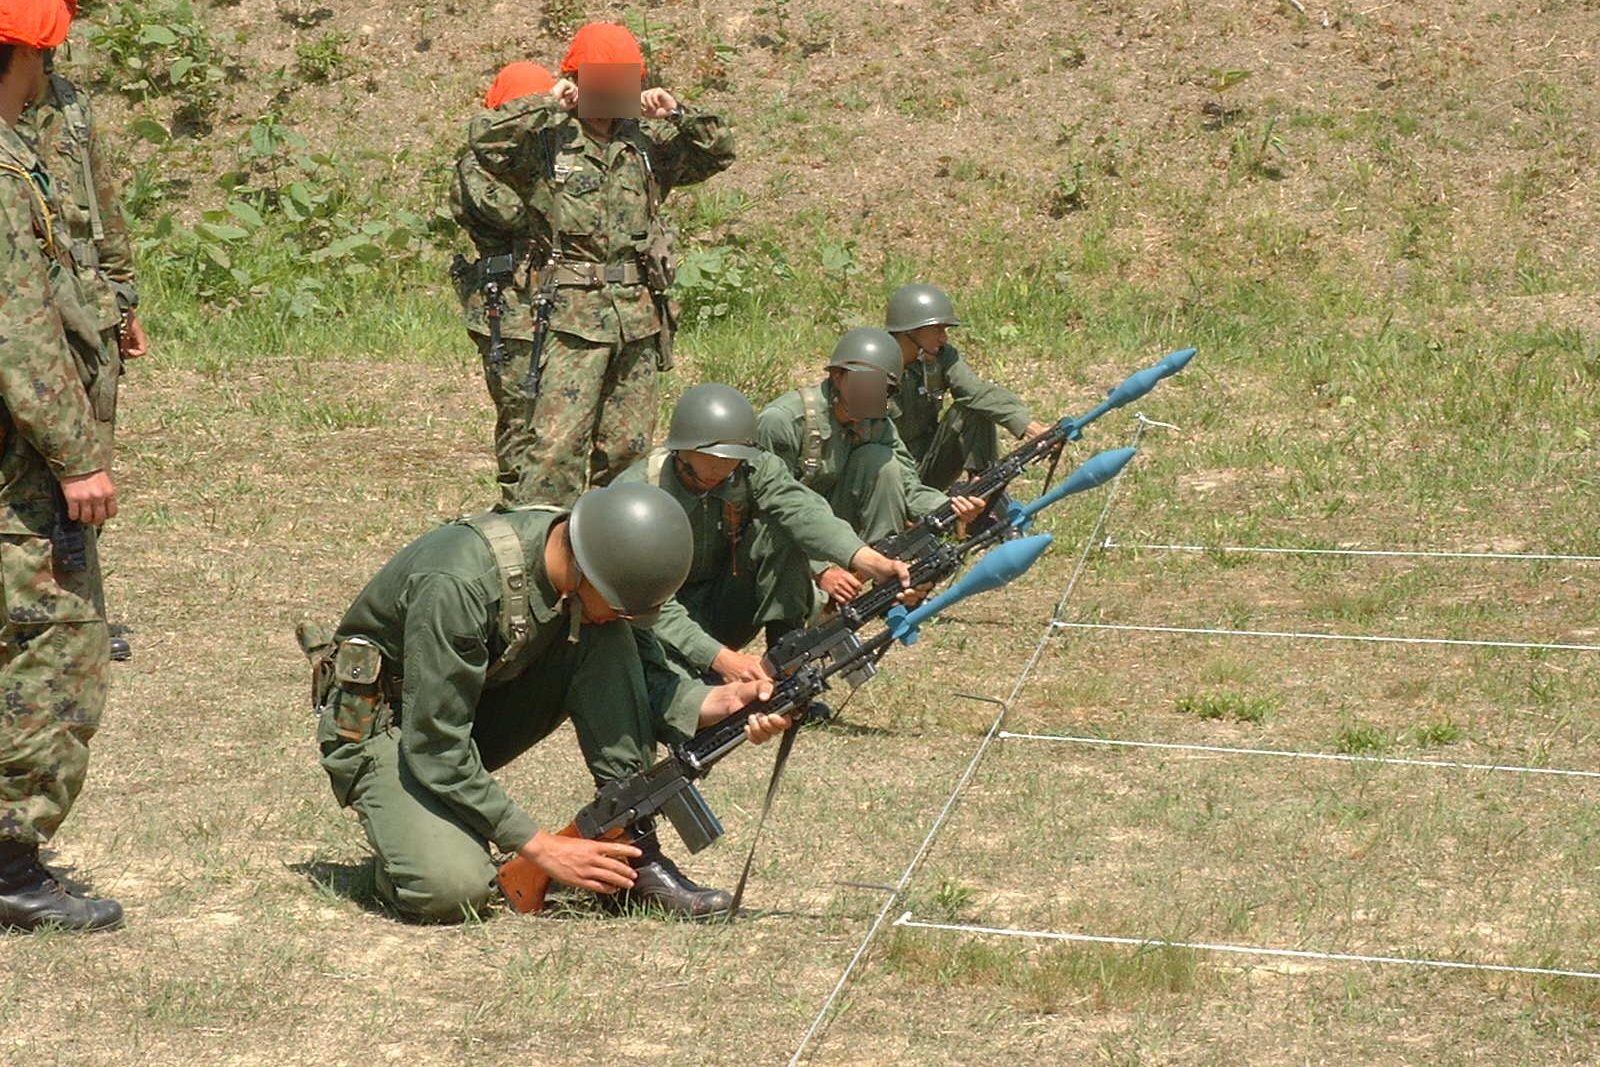 JGSDF Soldiers with M31 HEAT rifle grenades on a Howa Type 64